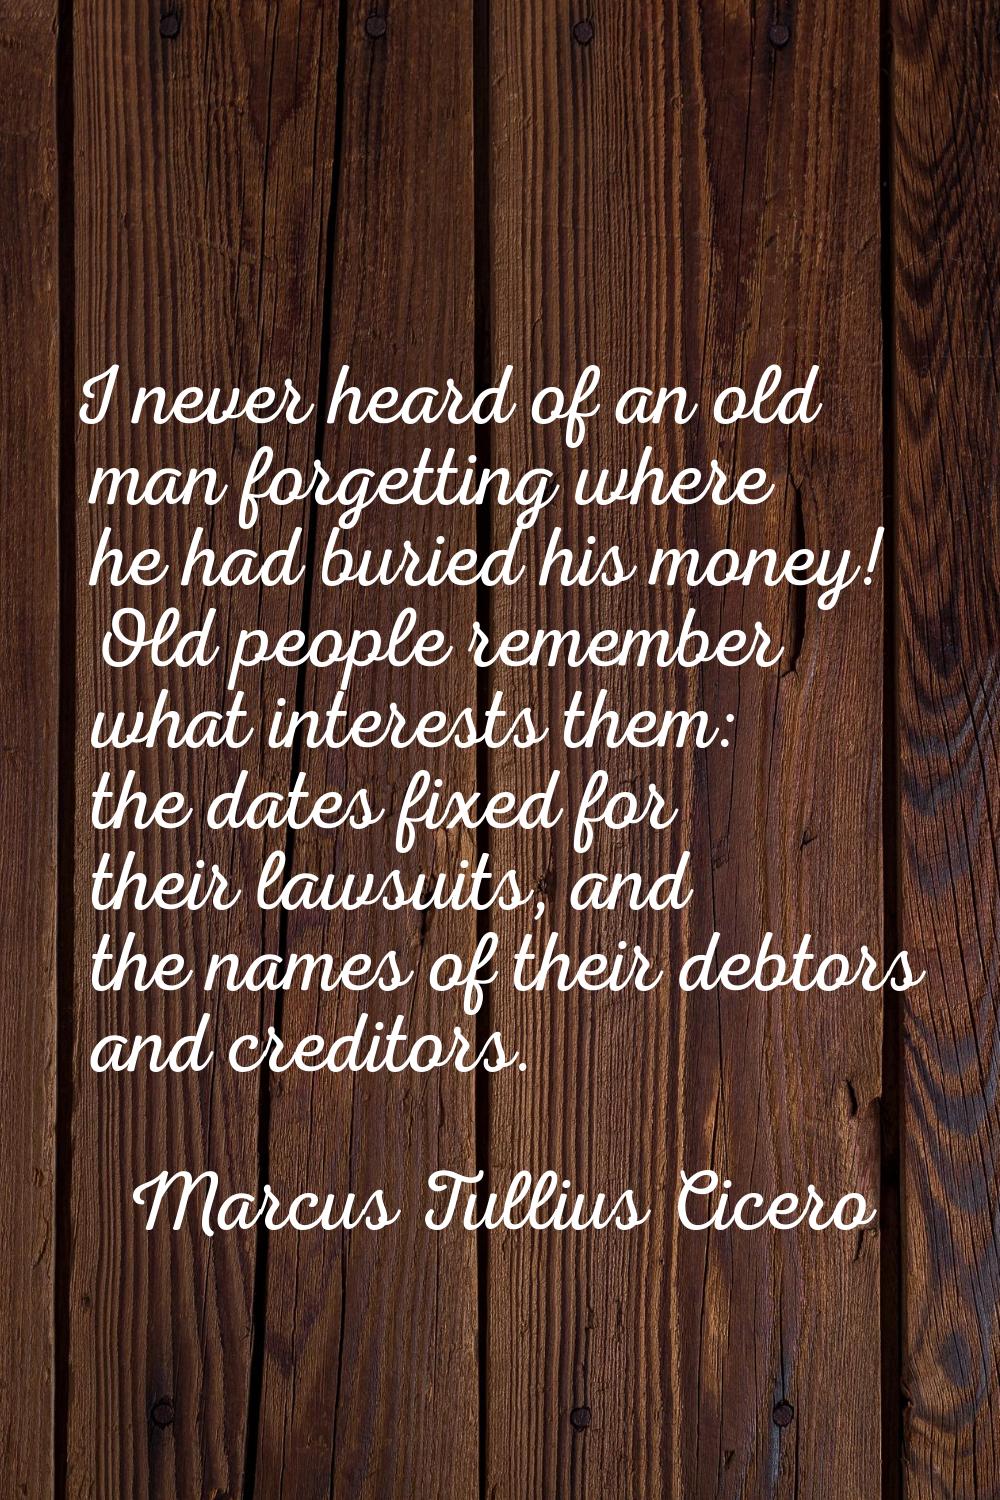 I never heard of an old man forgetting where he had buried his money! Old people remember what inte